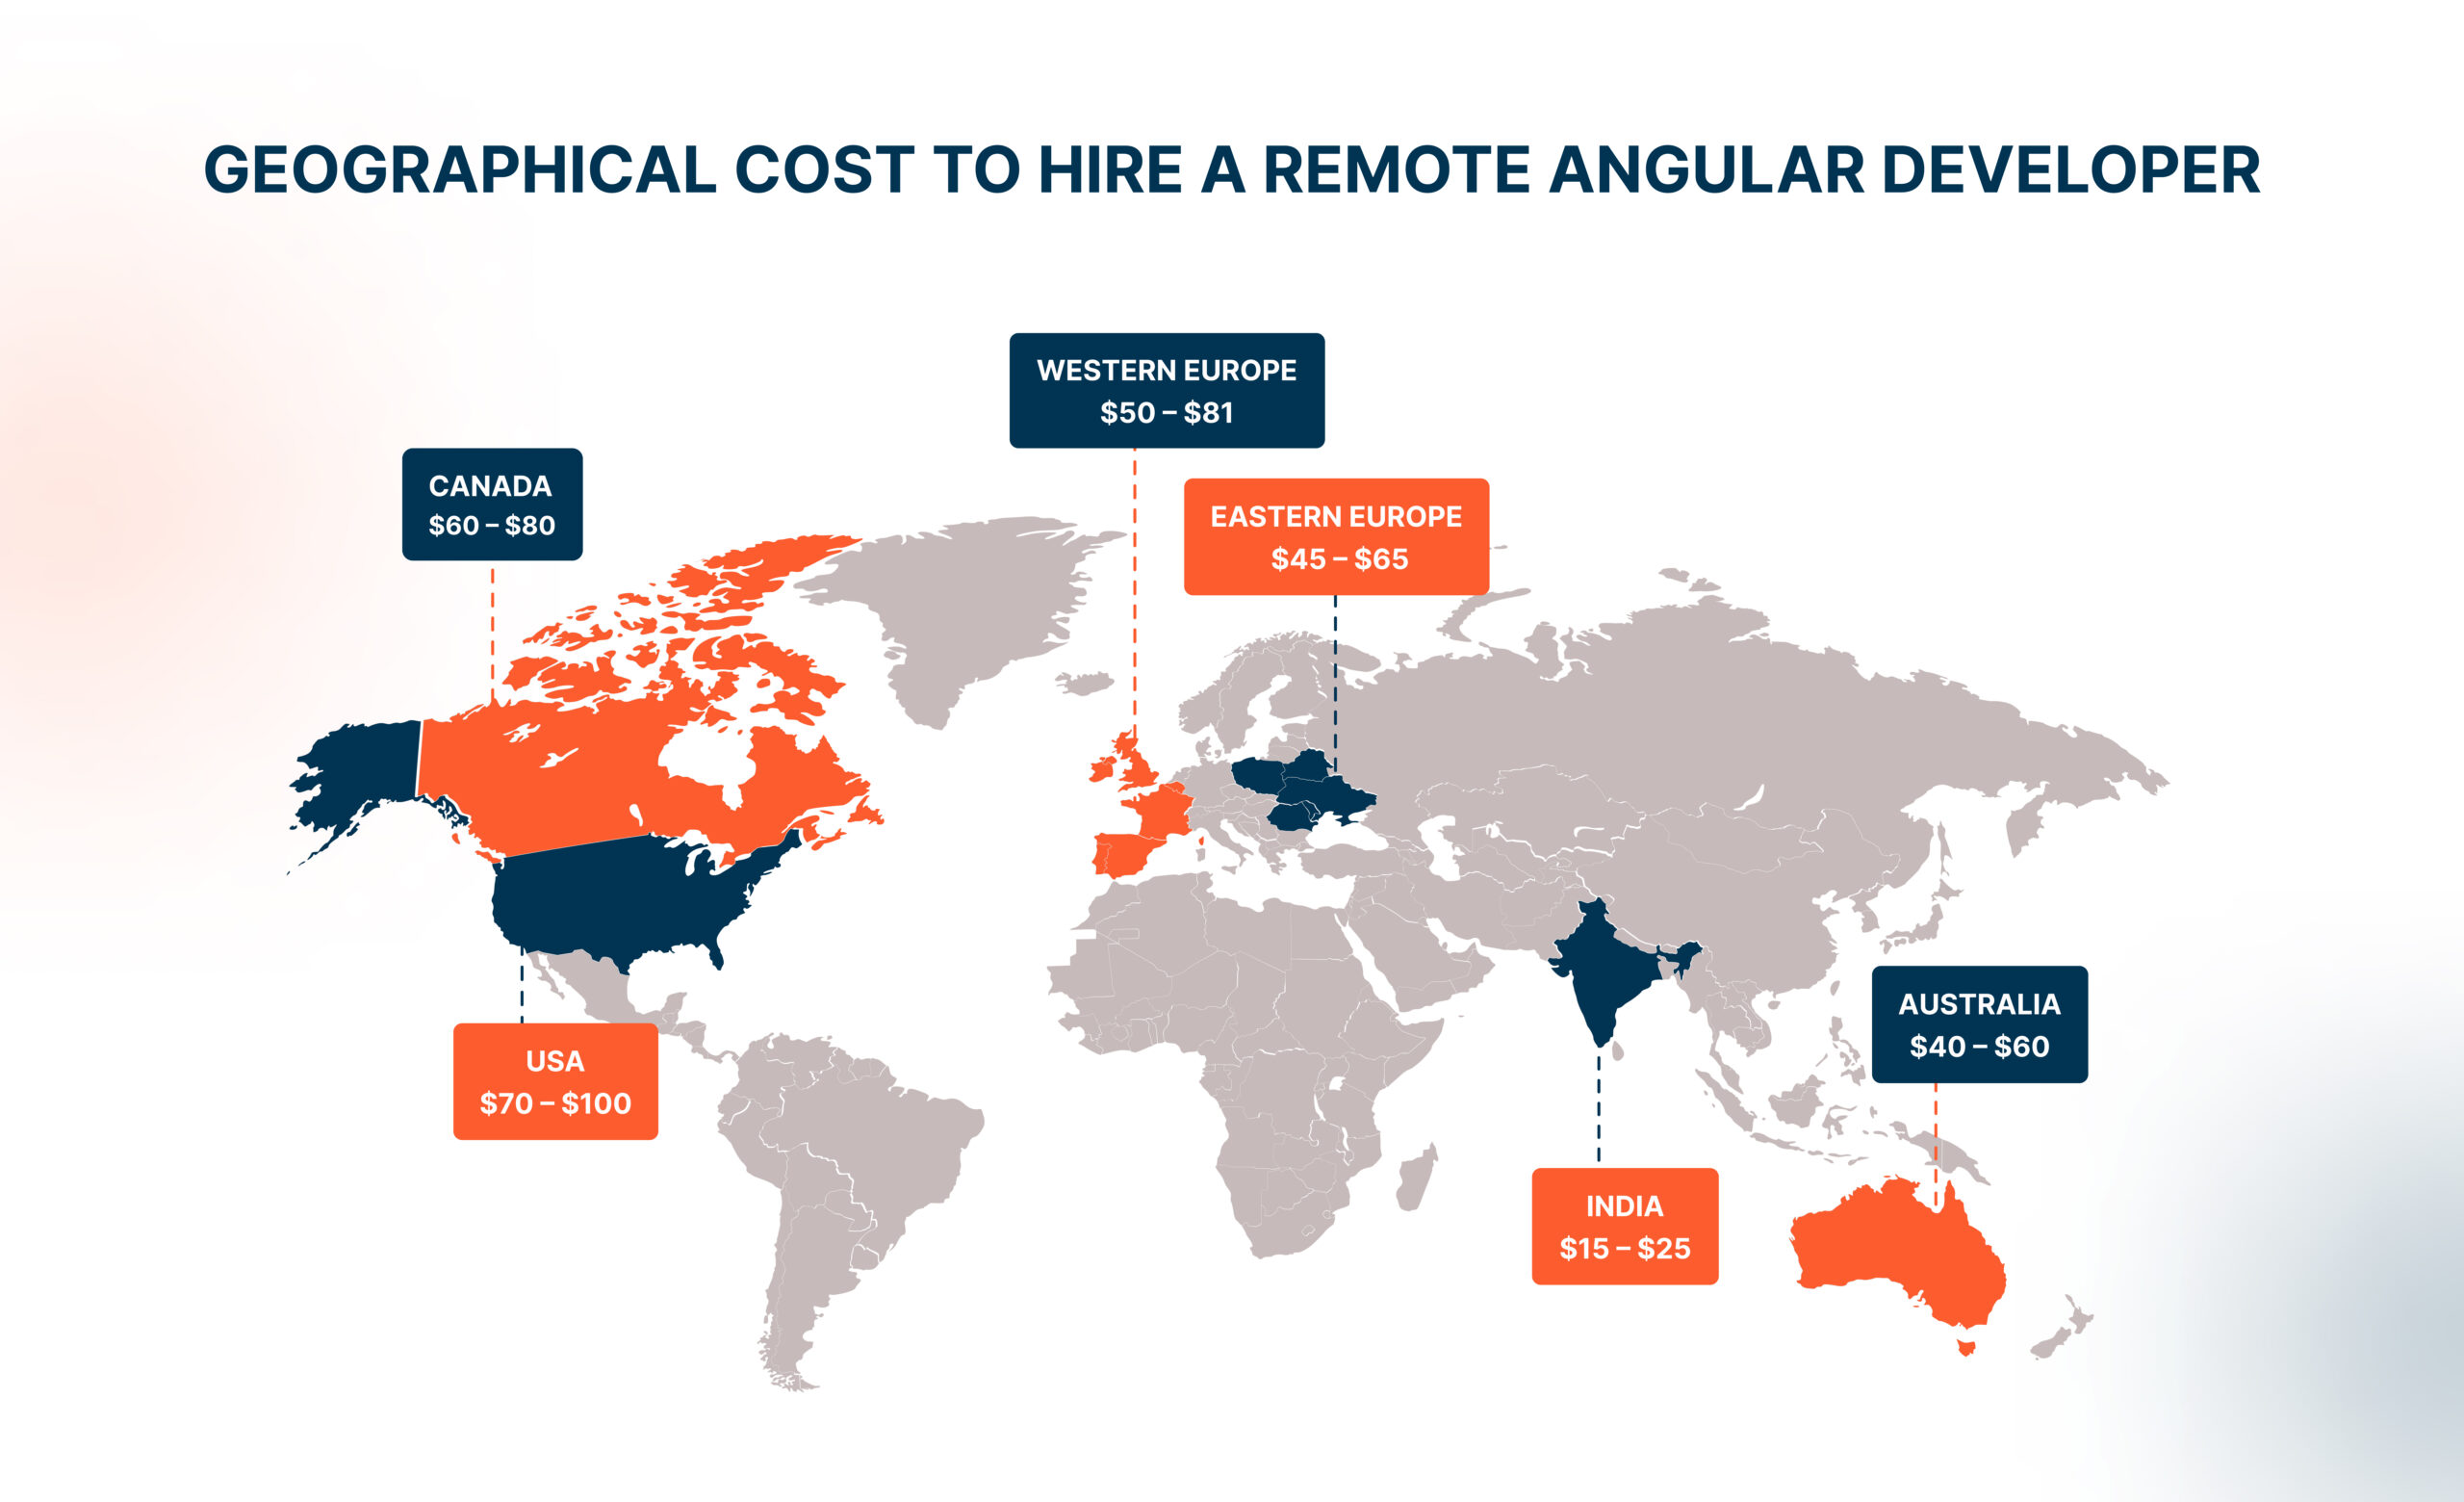 Geographical Cost to Hire a Remote Angular Developer